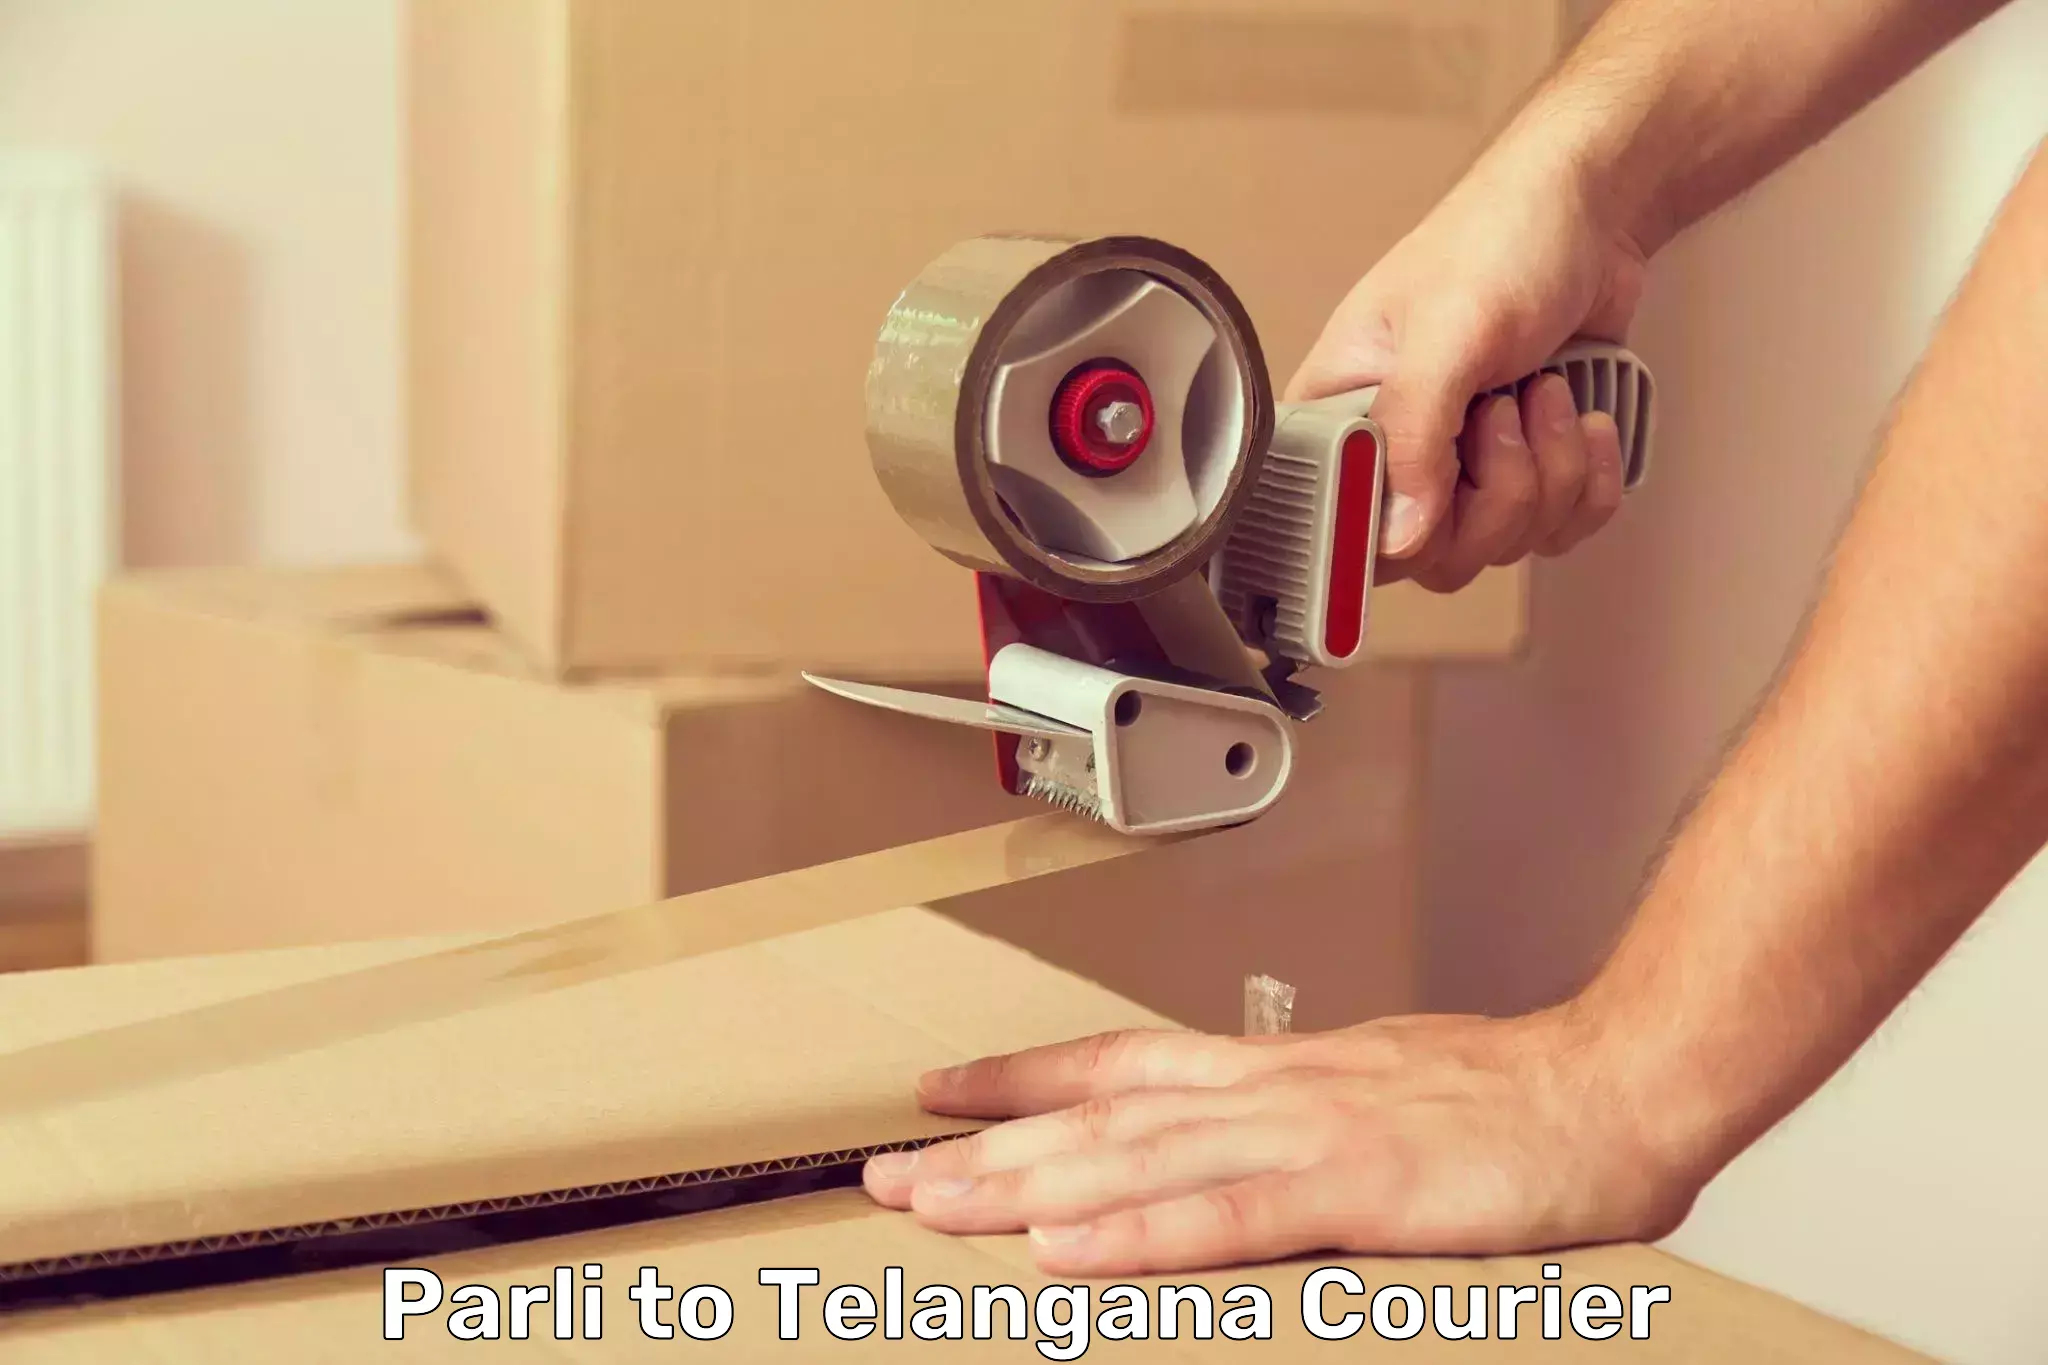 Overnight delivery services Parli to Telangana